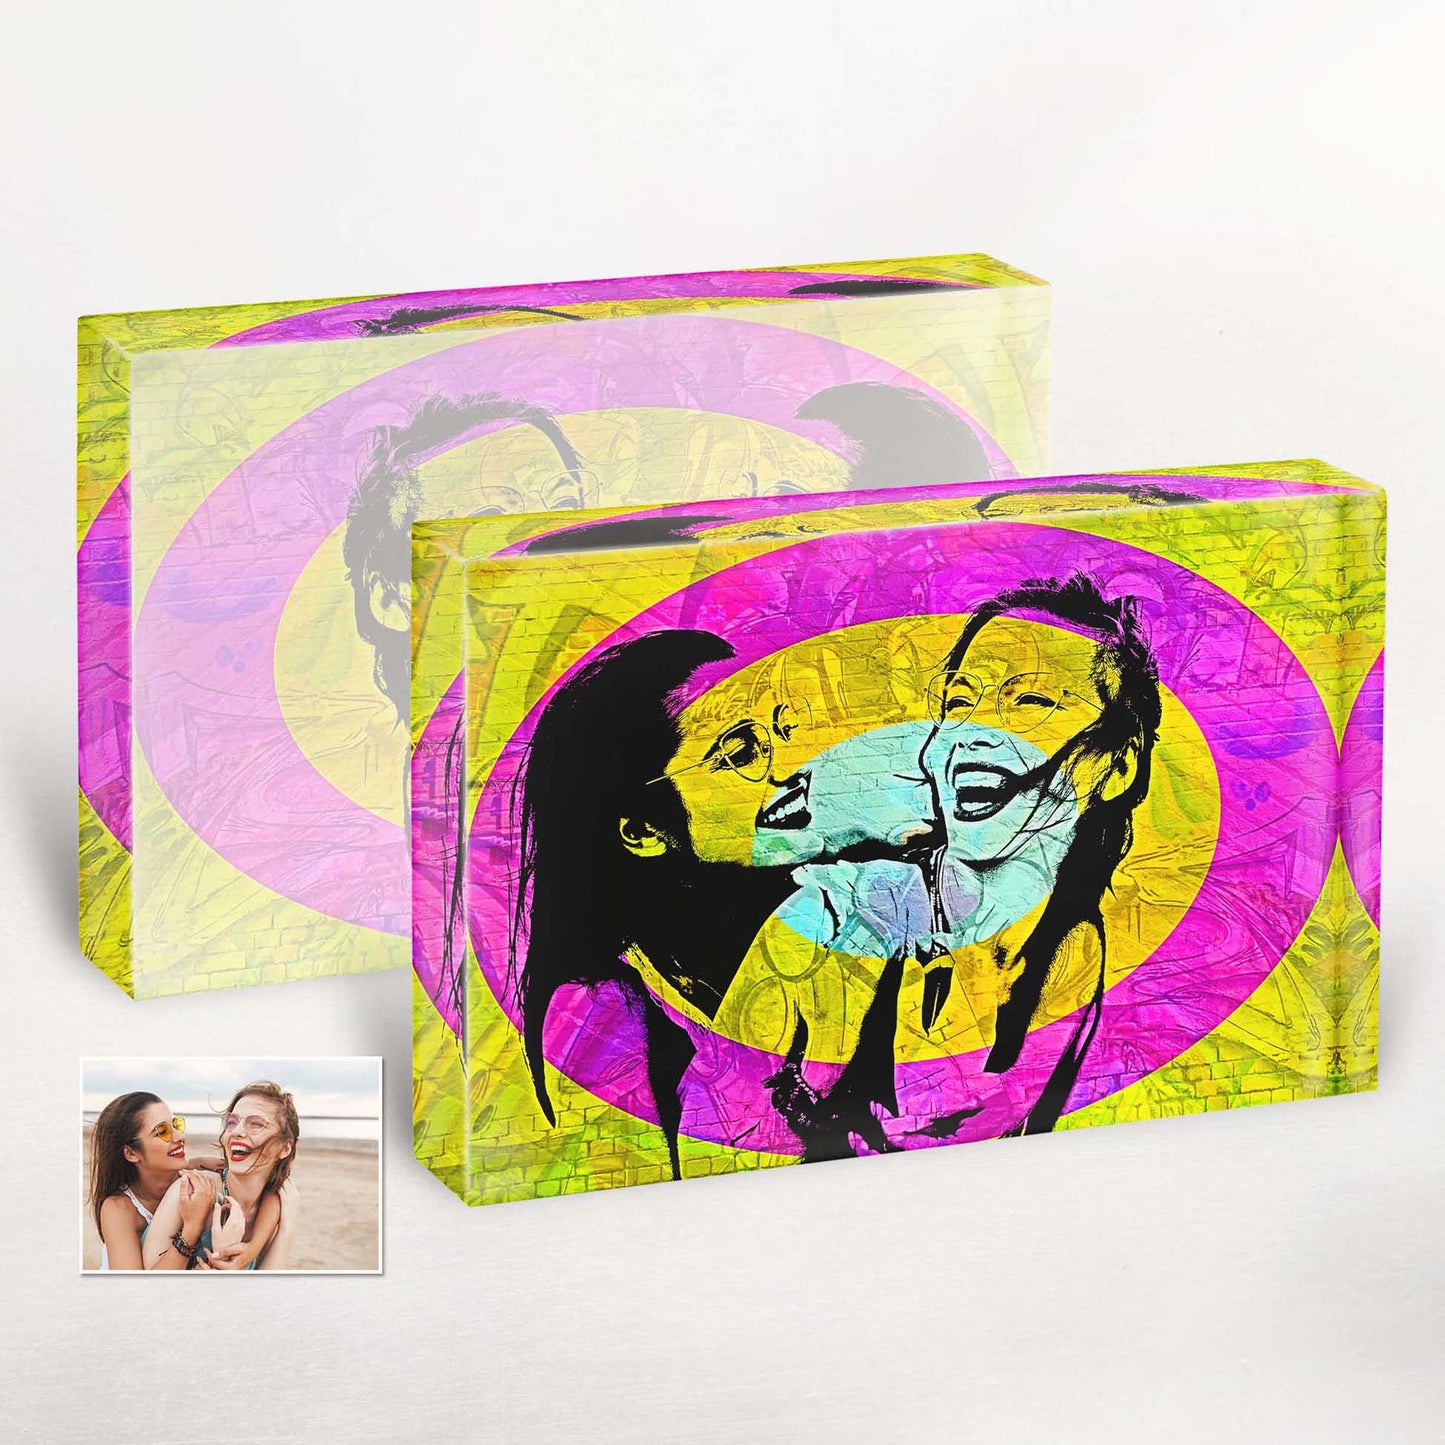 Add a touch of urban flair to your decor with the Personalised Graffiti Street Art Acrylic Block Photo. Its cool and fresh design captures the essence of street art, making it a unique and vibrant novelty gift for couples